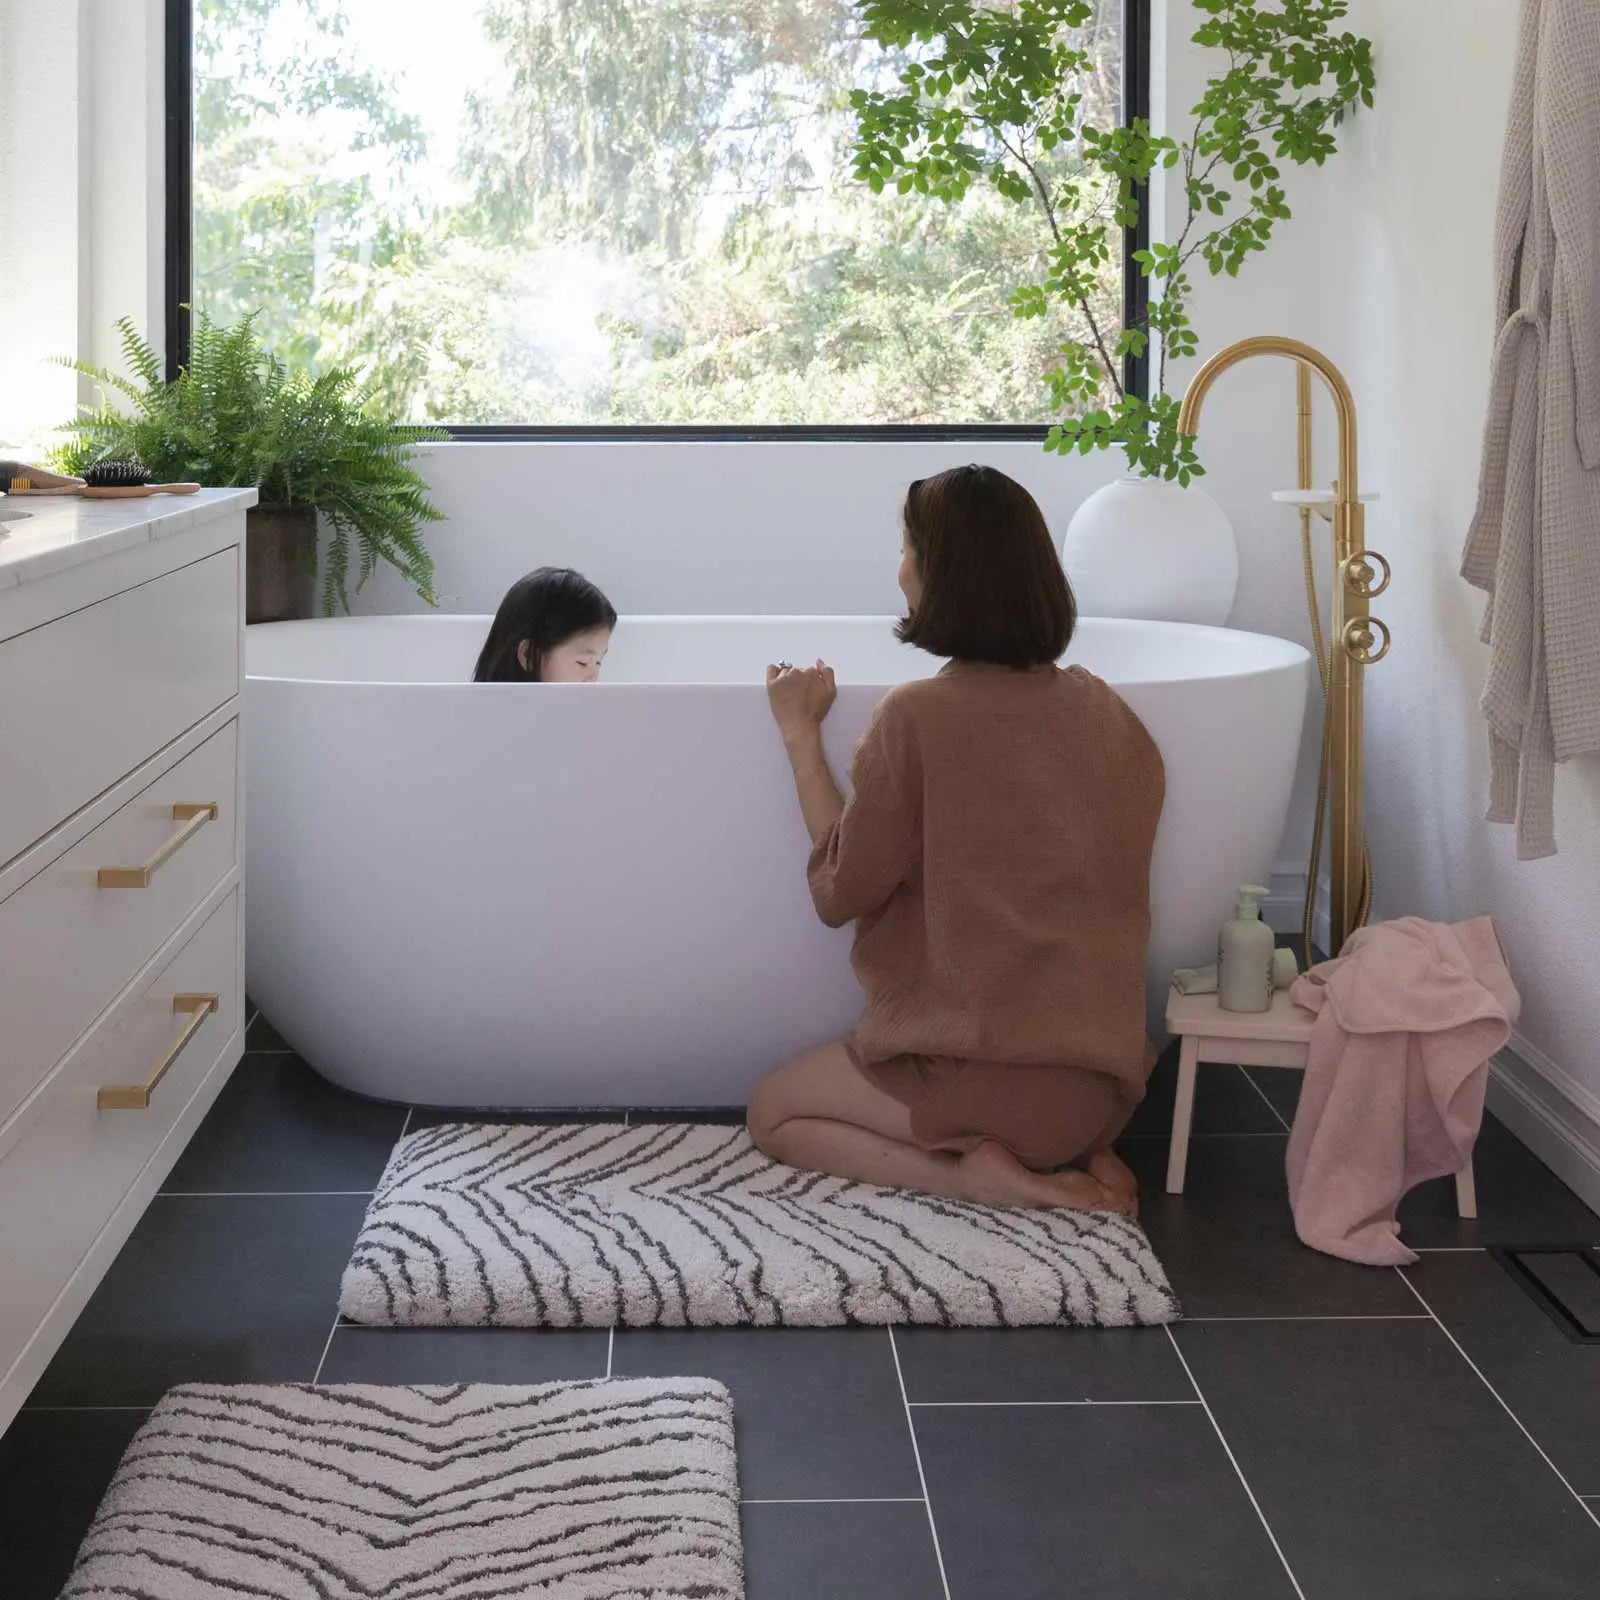 
A Luxurious New Landing
Hello, Bathroom
From our new bath mats to the playmat that started it all, we bring our one-of-a-kind comfort and style to every room in your house.  Every mat we make is designed with your home in mind and built for living life to the fullest - and the softest.
